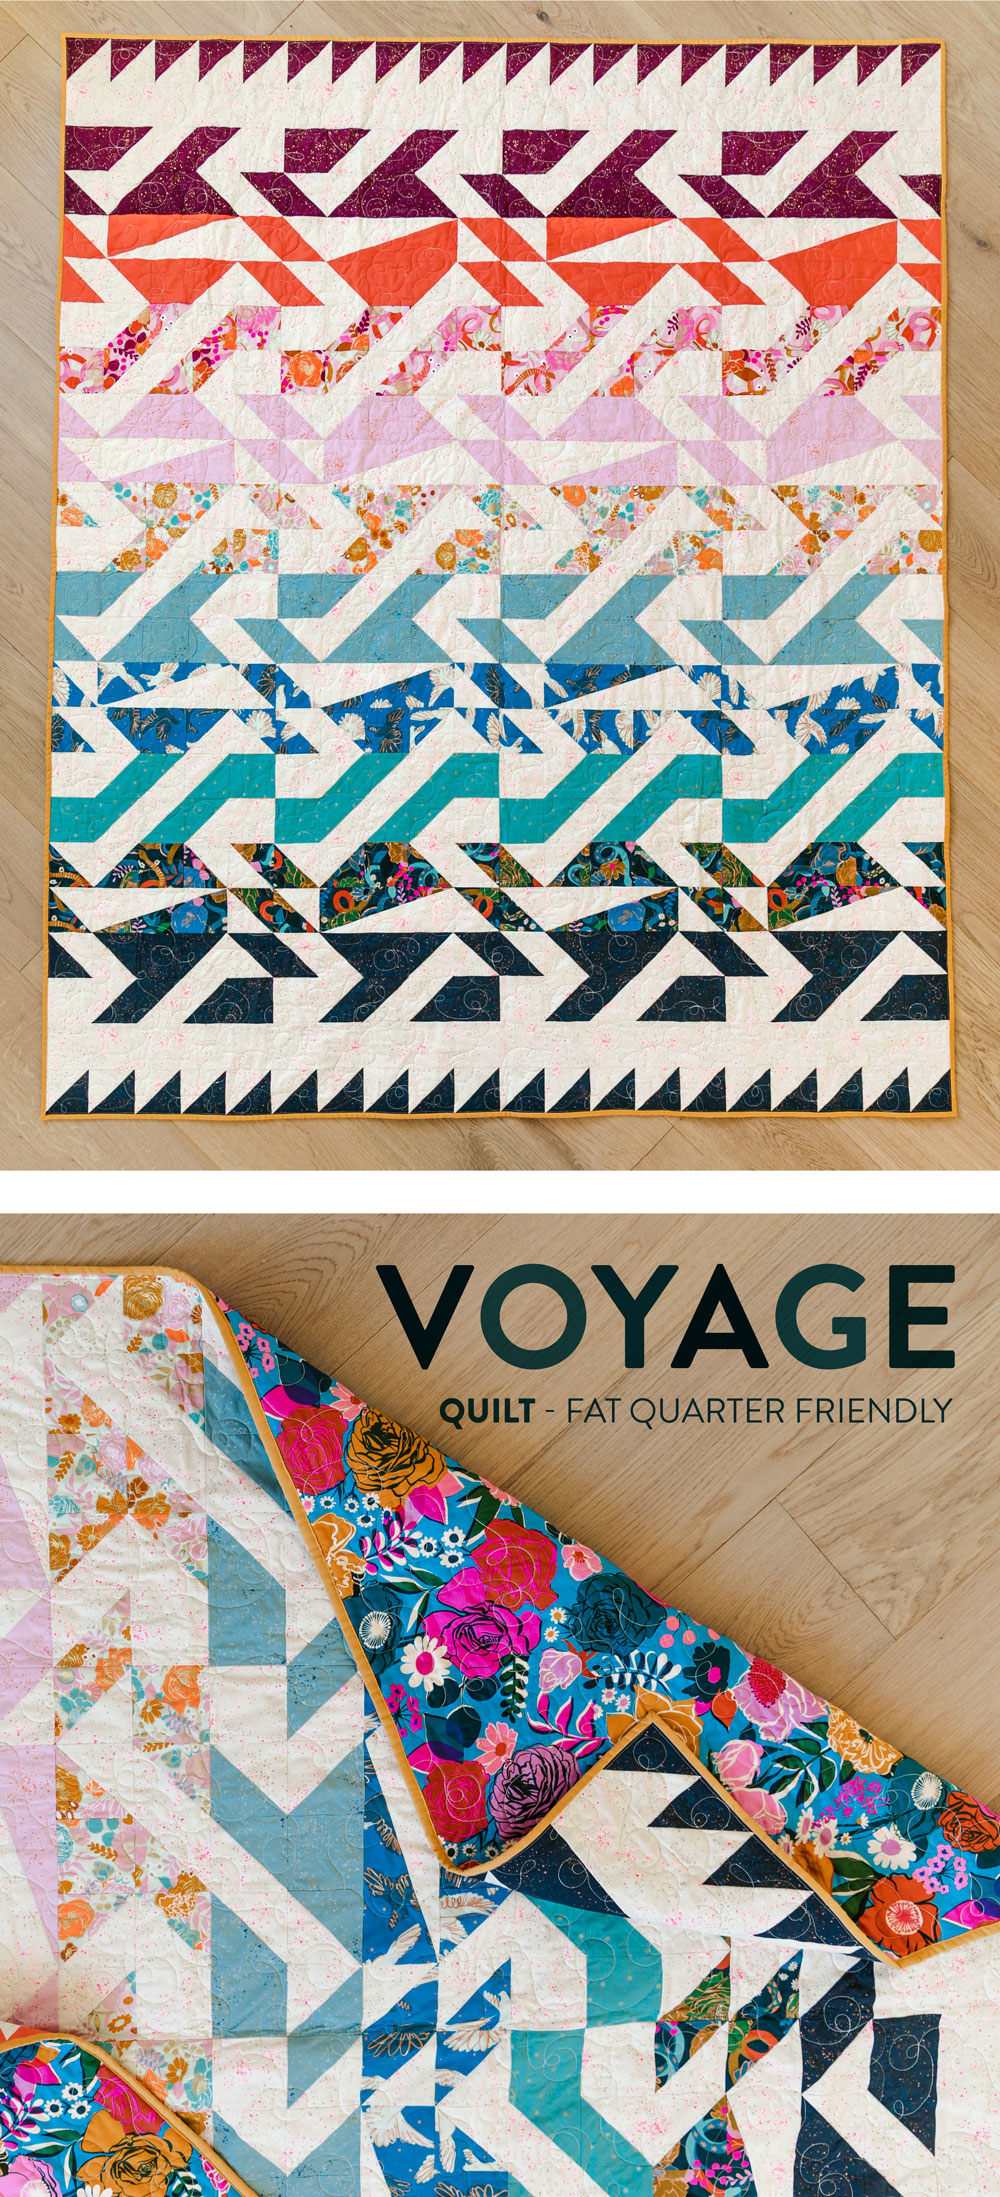 The Voyage quilt pattern is fat quarter friendly and a great quilt pattern for beginners – includes lots of extra video tutorials.